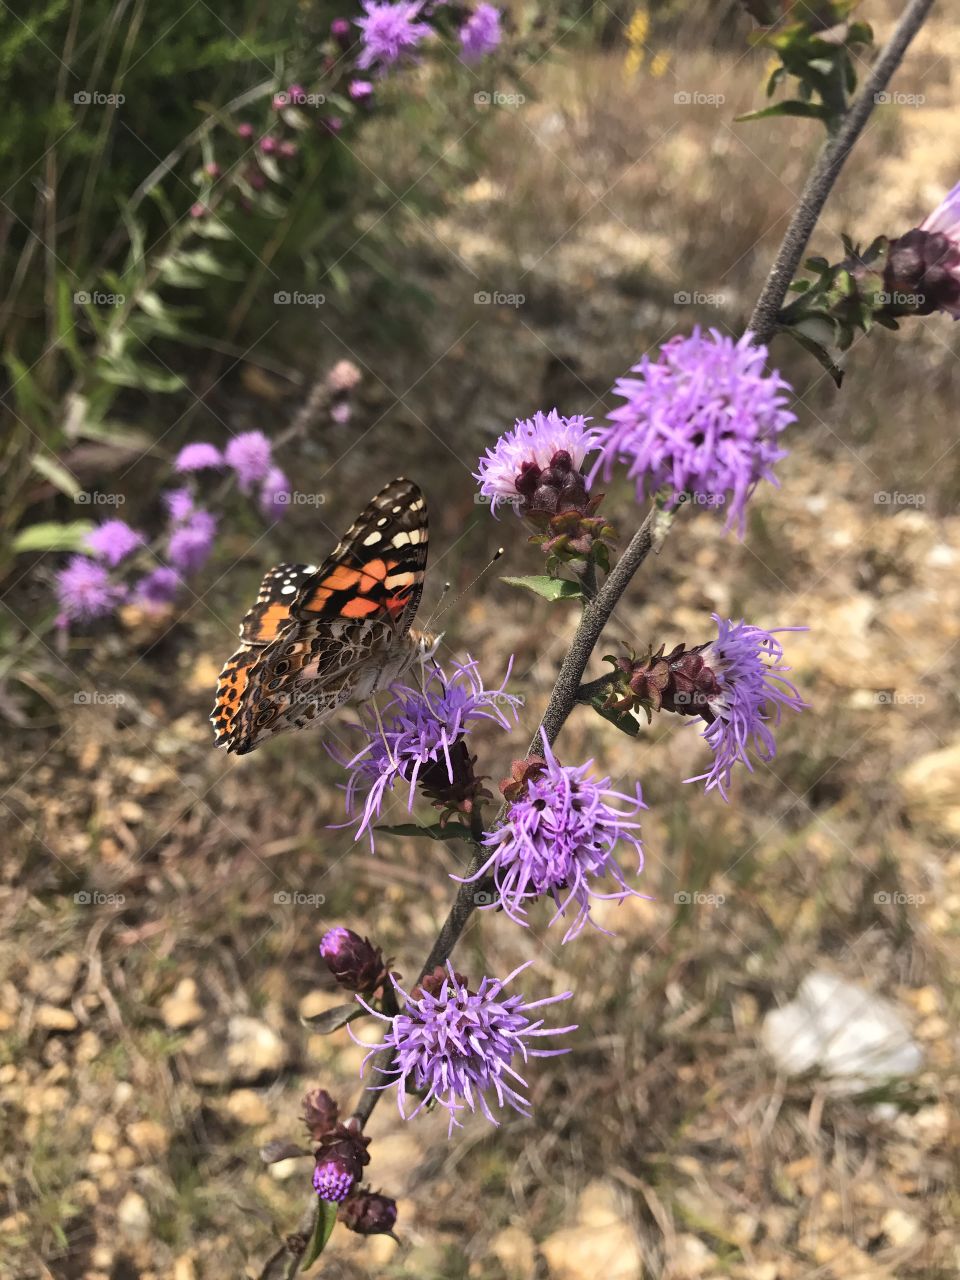 I never grow tired of watching these butterflies 